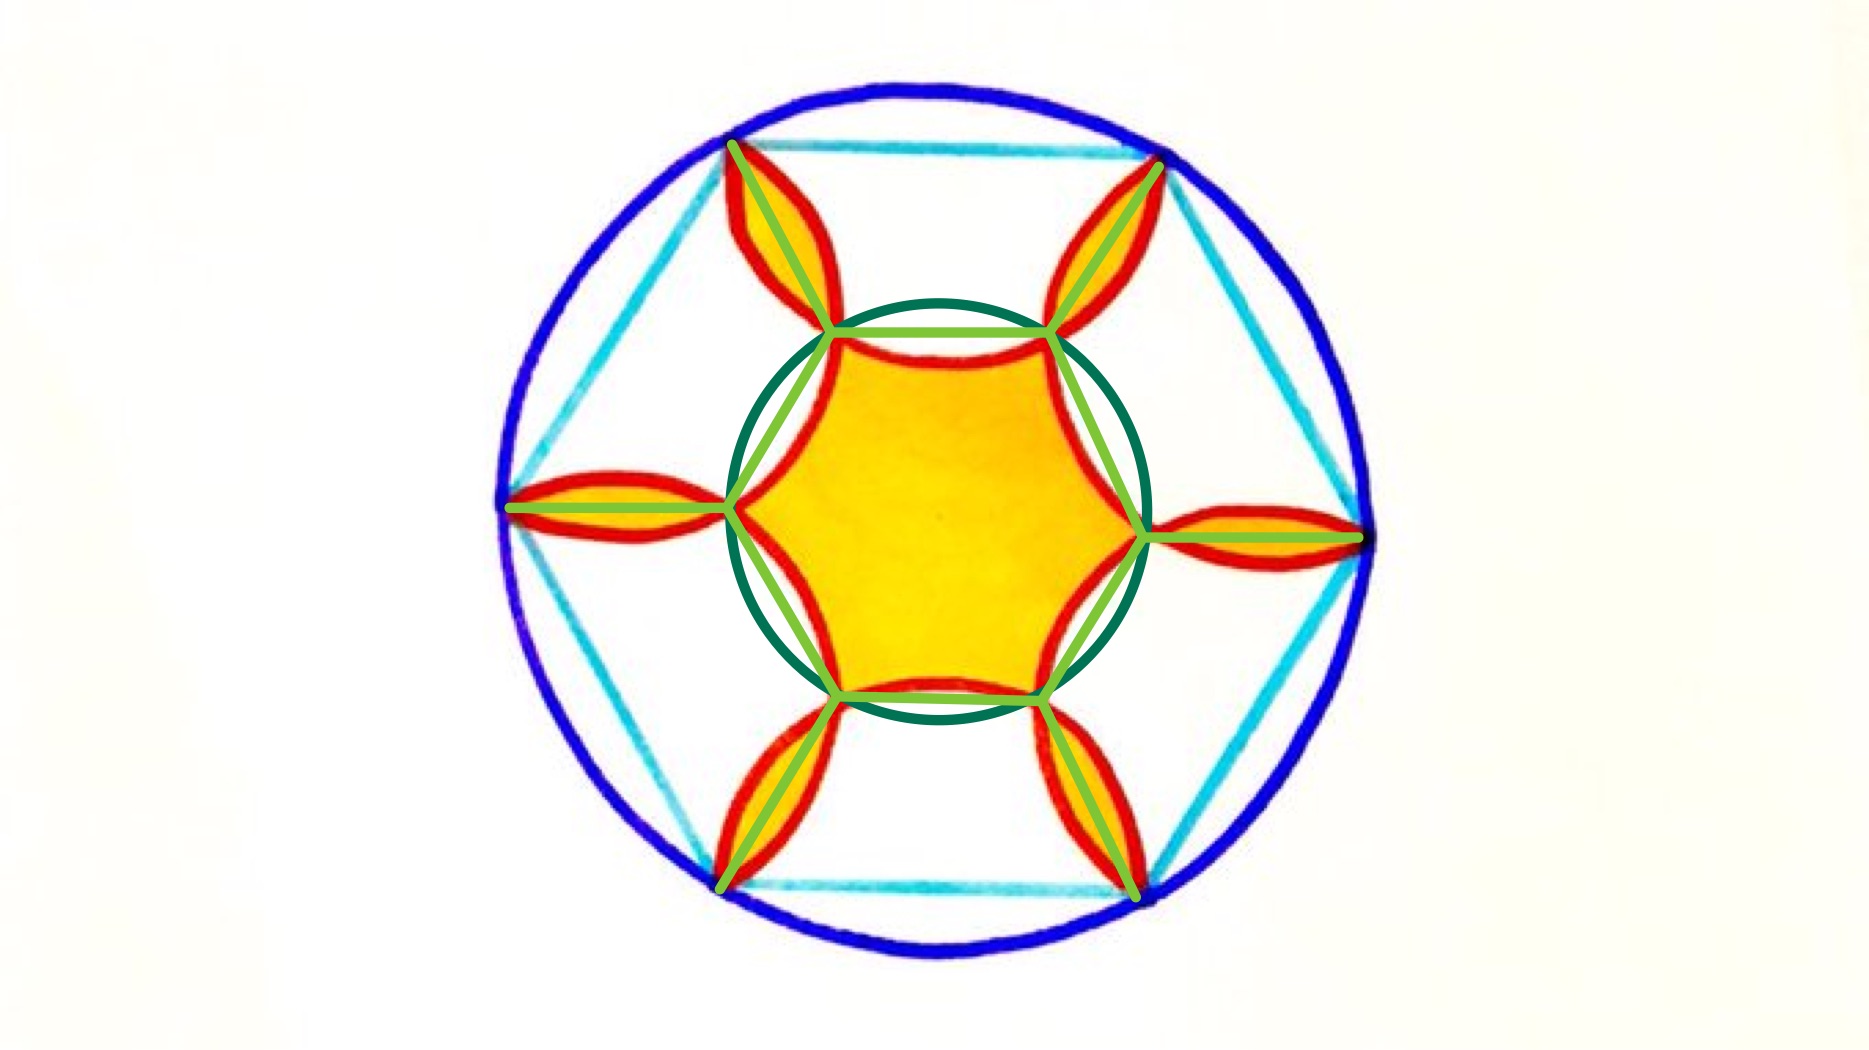 Six semi-circles in a circle labelled